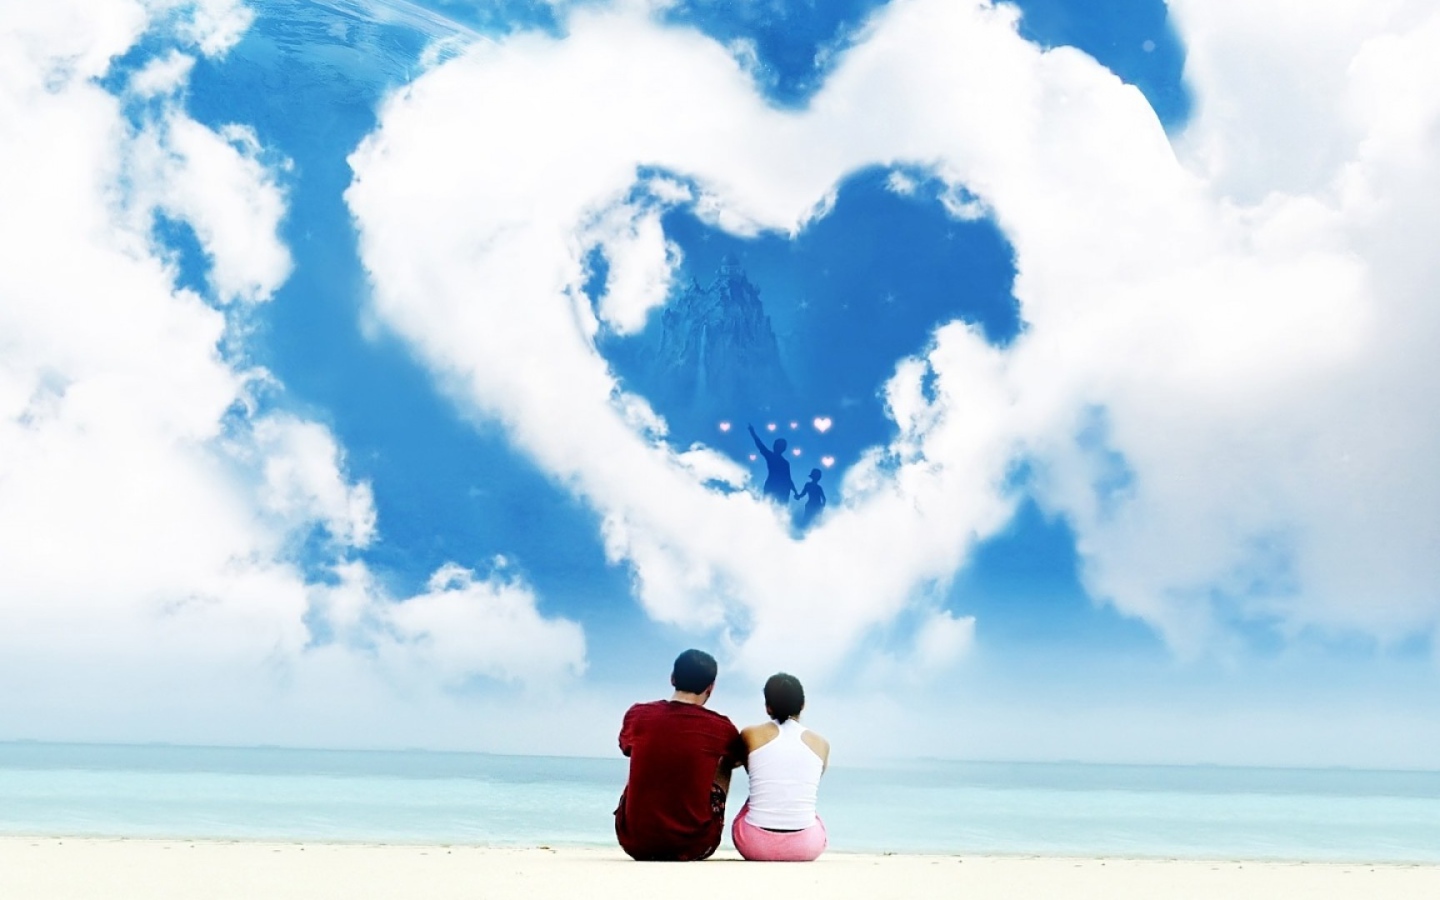 Lovers on the background of clouds in the shape of heart